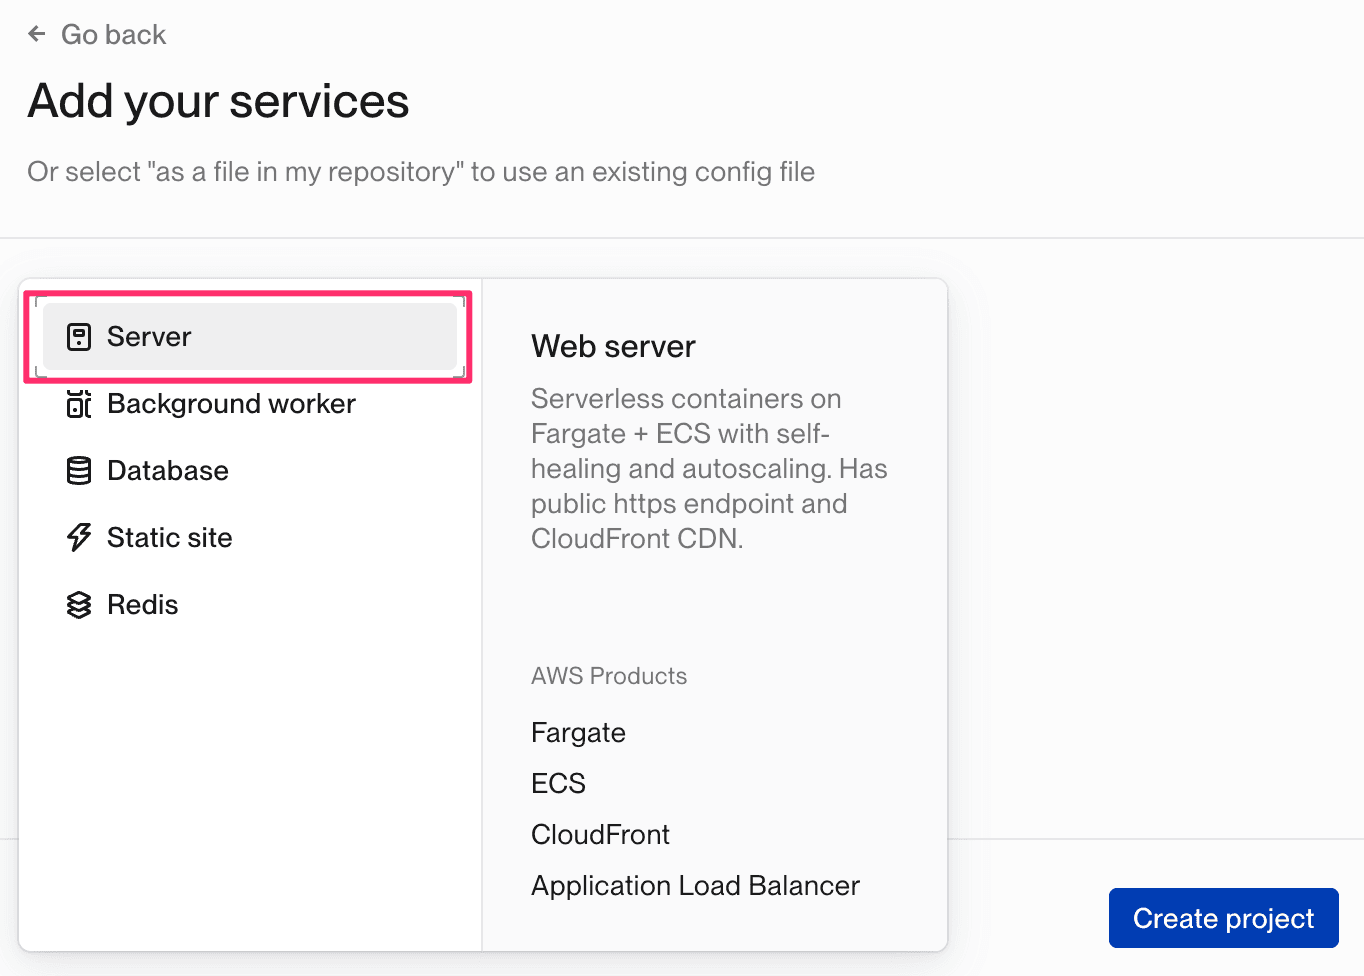 Add your services dialog box with Service highlighted